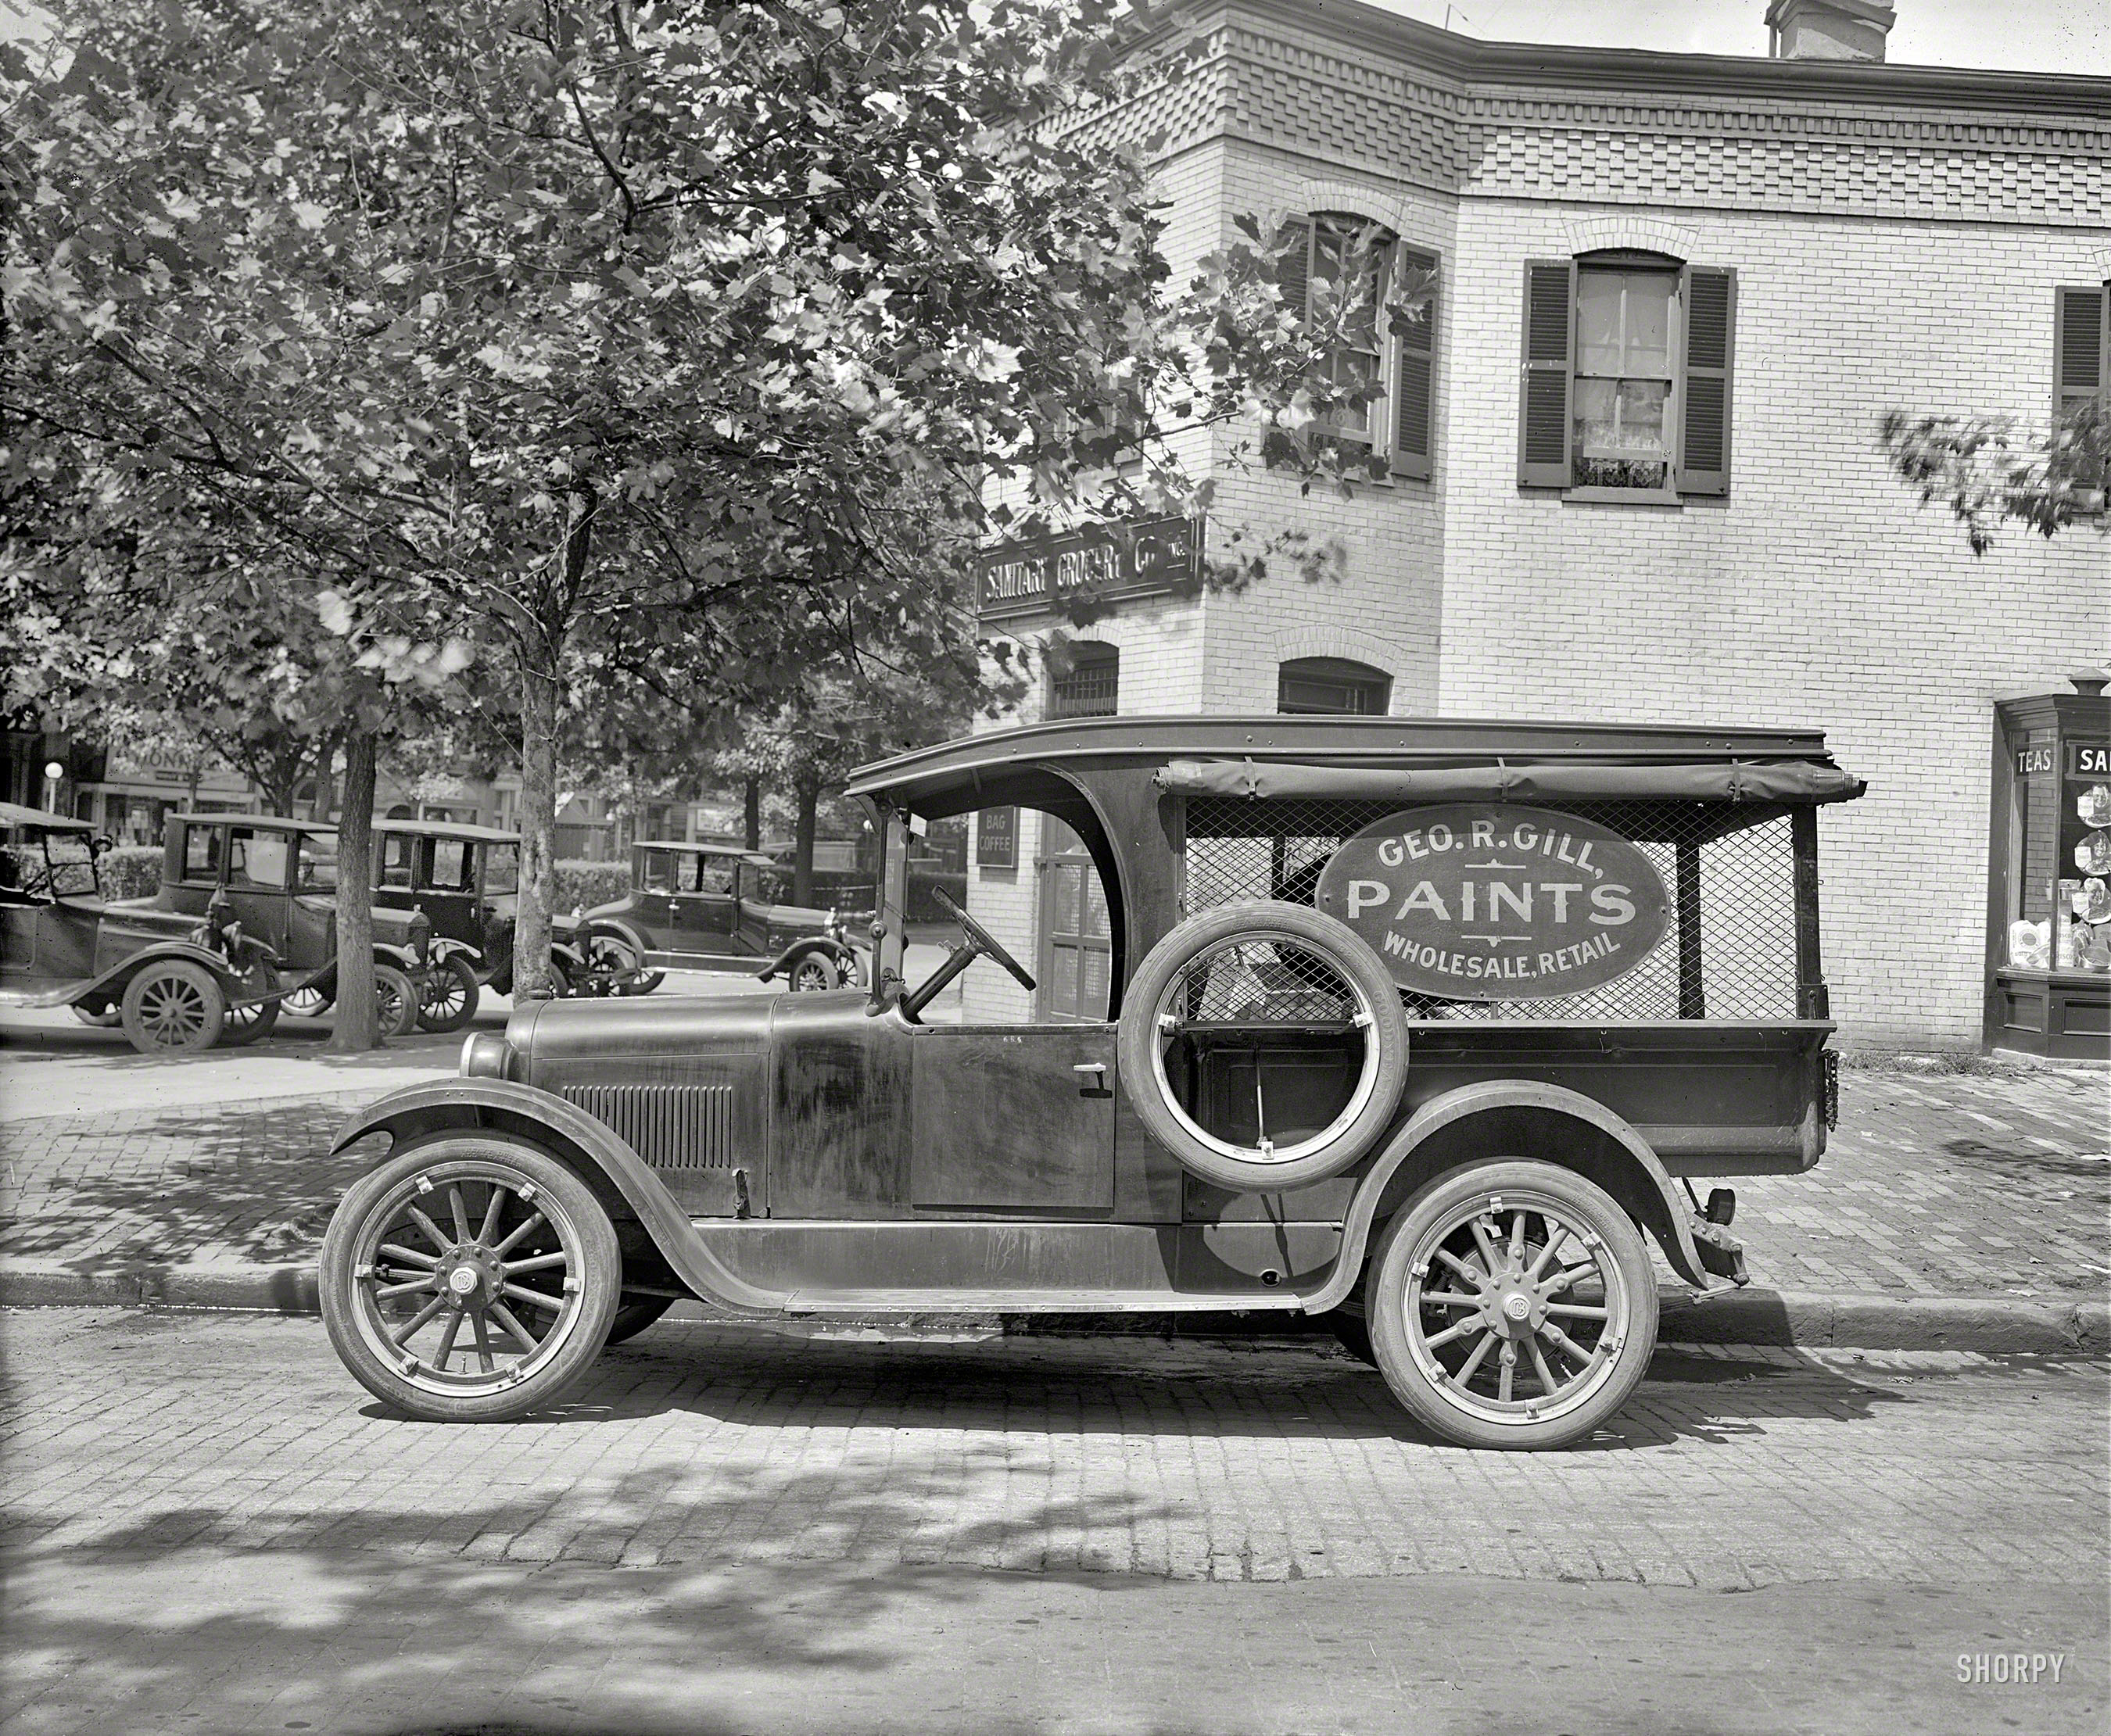 Washington, D.C., ca. 1920. "Semmes Motor Co. -- Dodge Bros. truck." At the Sanitary Grocery. National Photo Company glass negative. View full size.